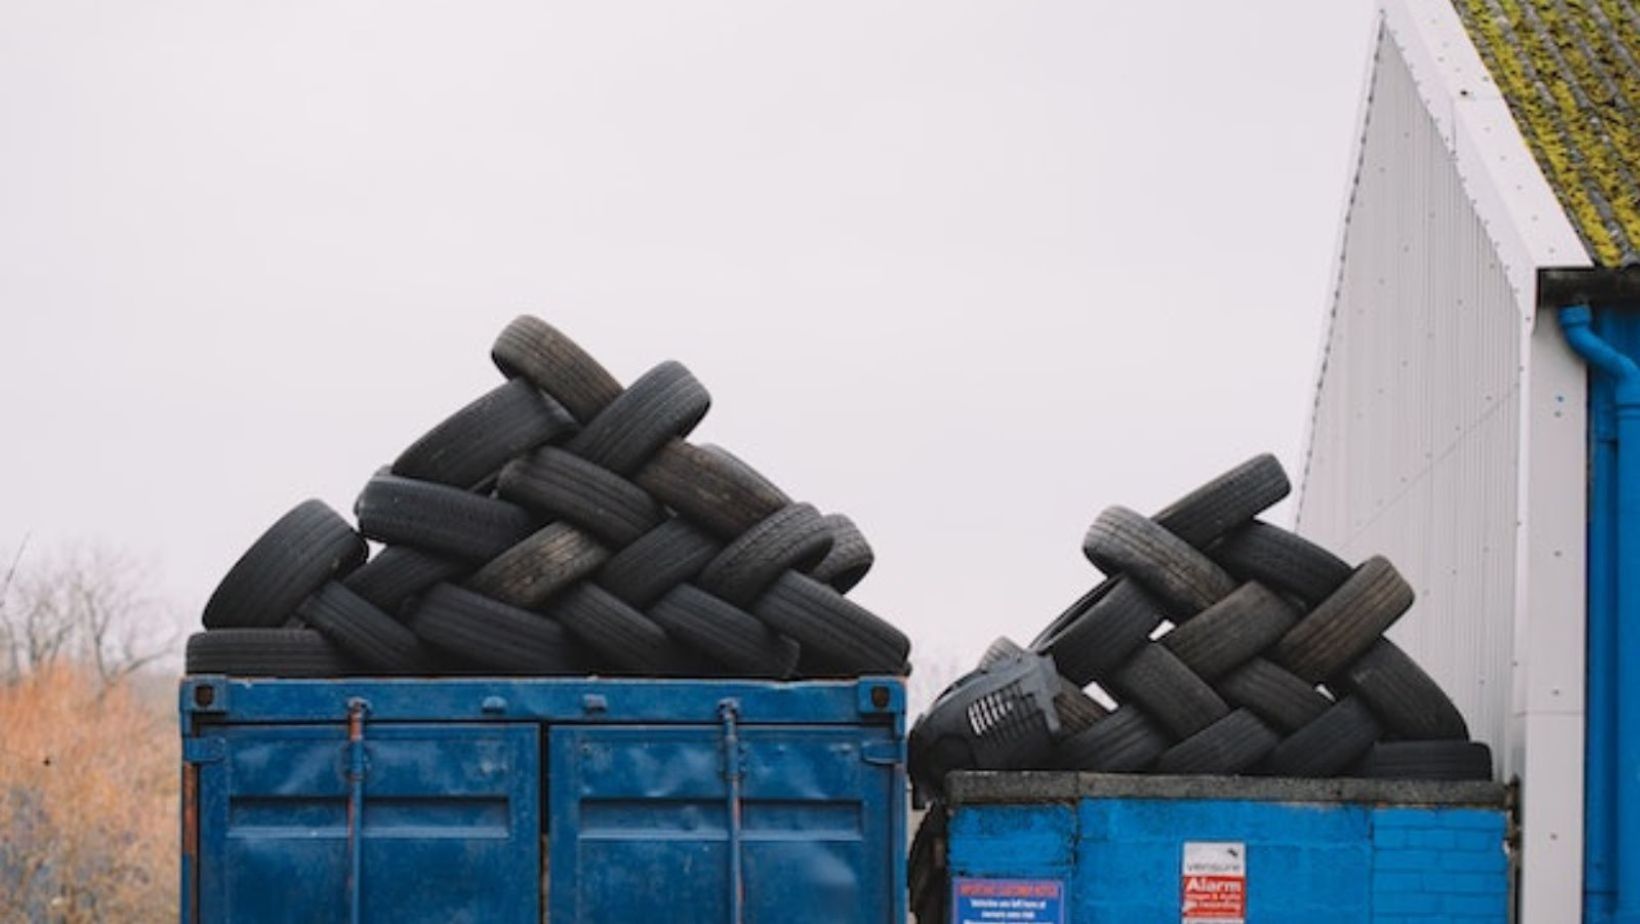 Waste containers full of tires